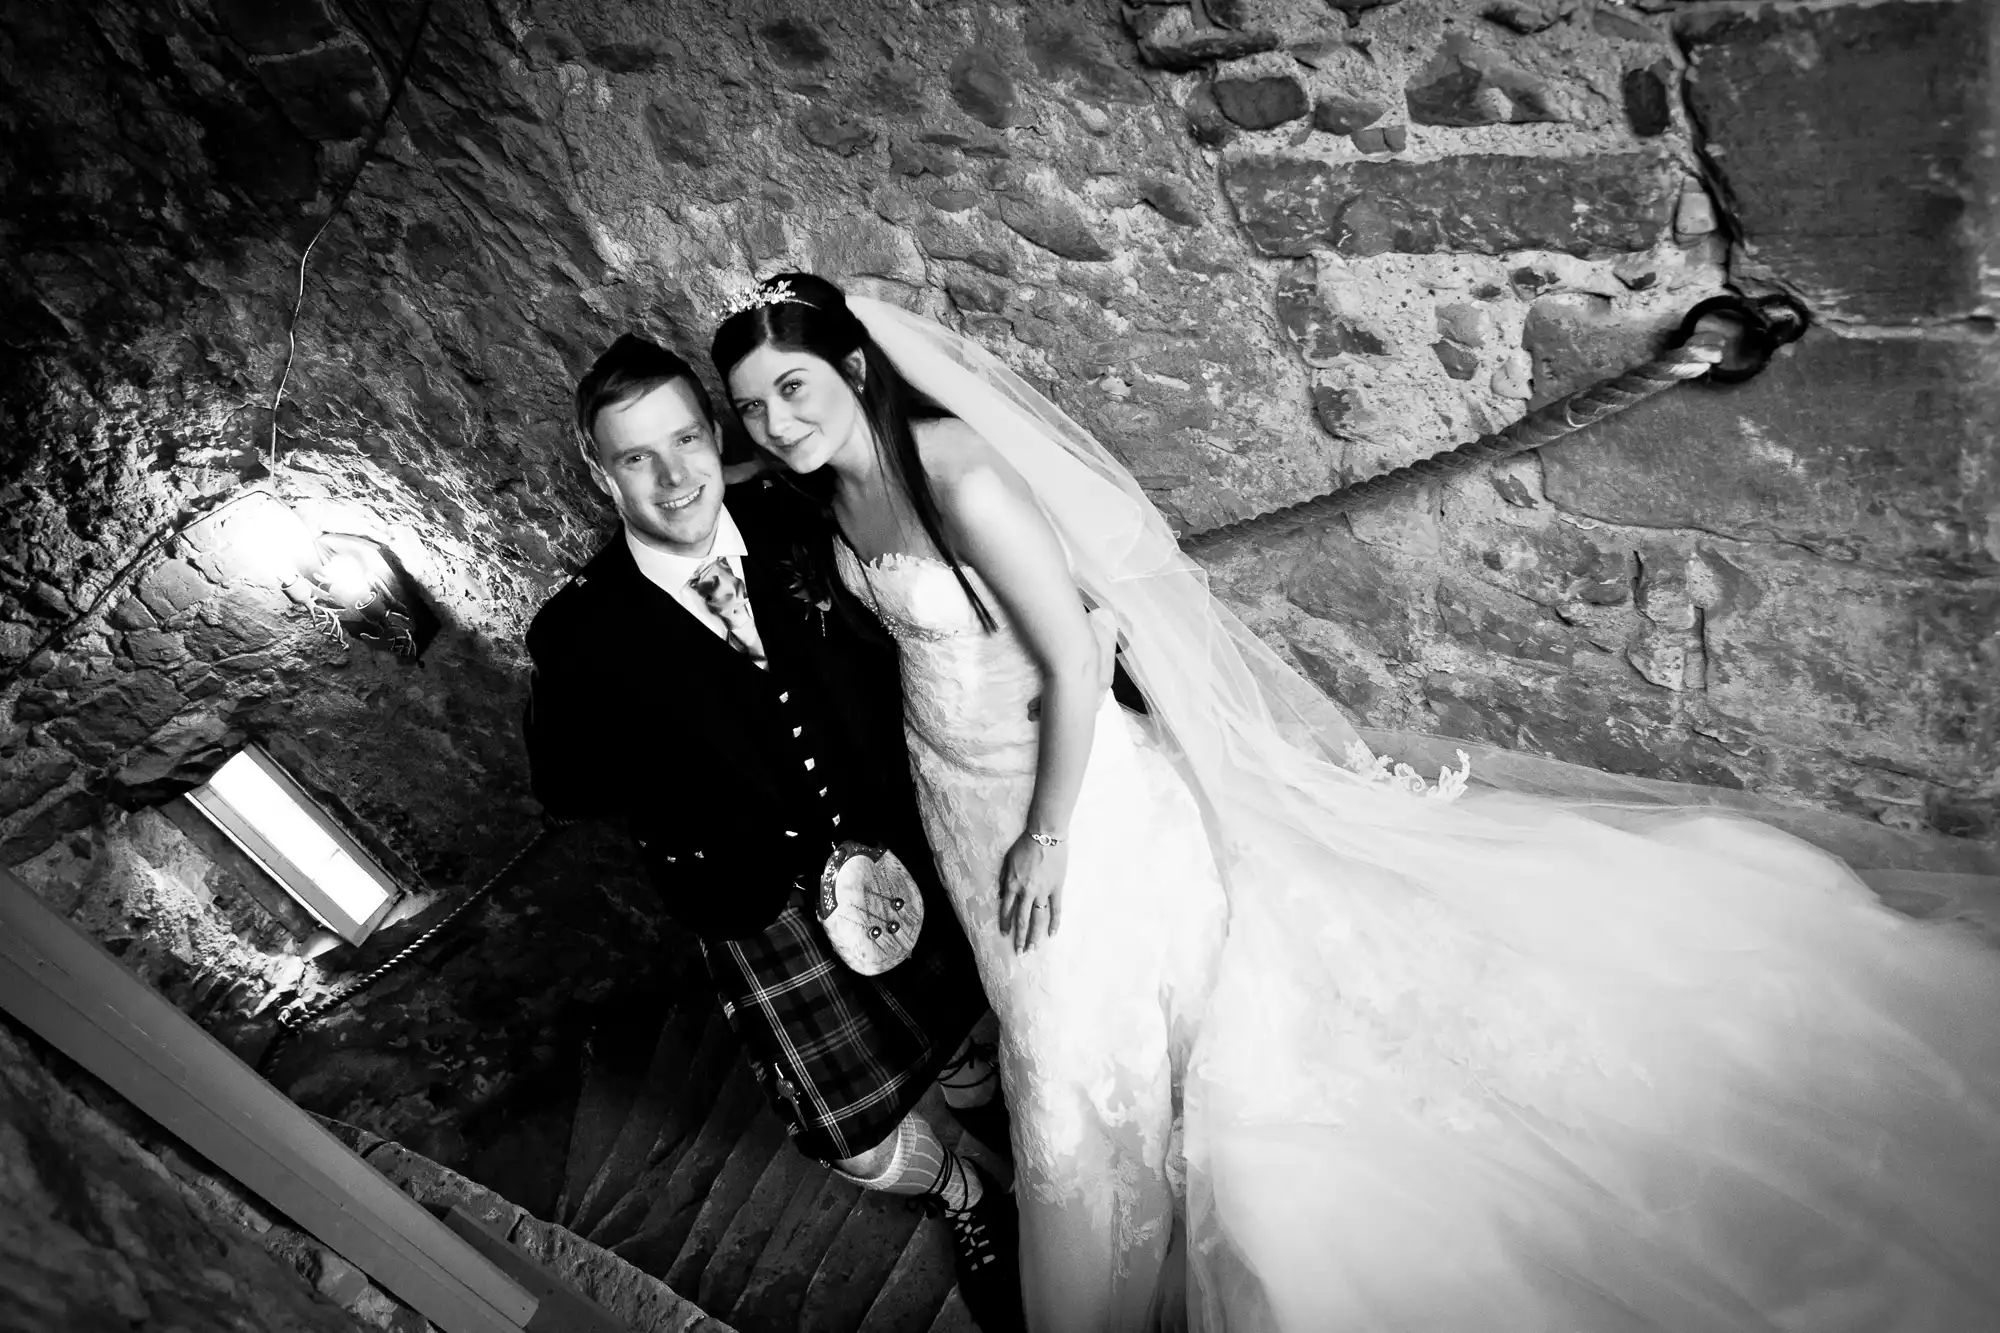 A bride and groom in wedding attire, the groom in a kilt, smiling inside a stone-walled stairwell, creating a romantic atmosphere.